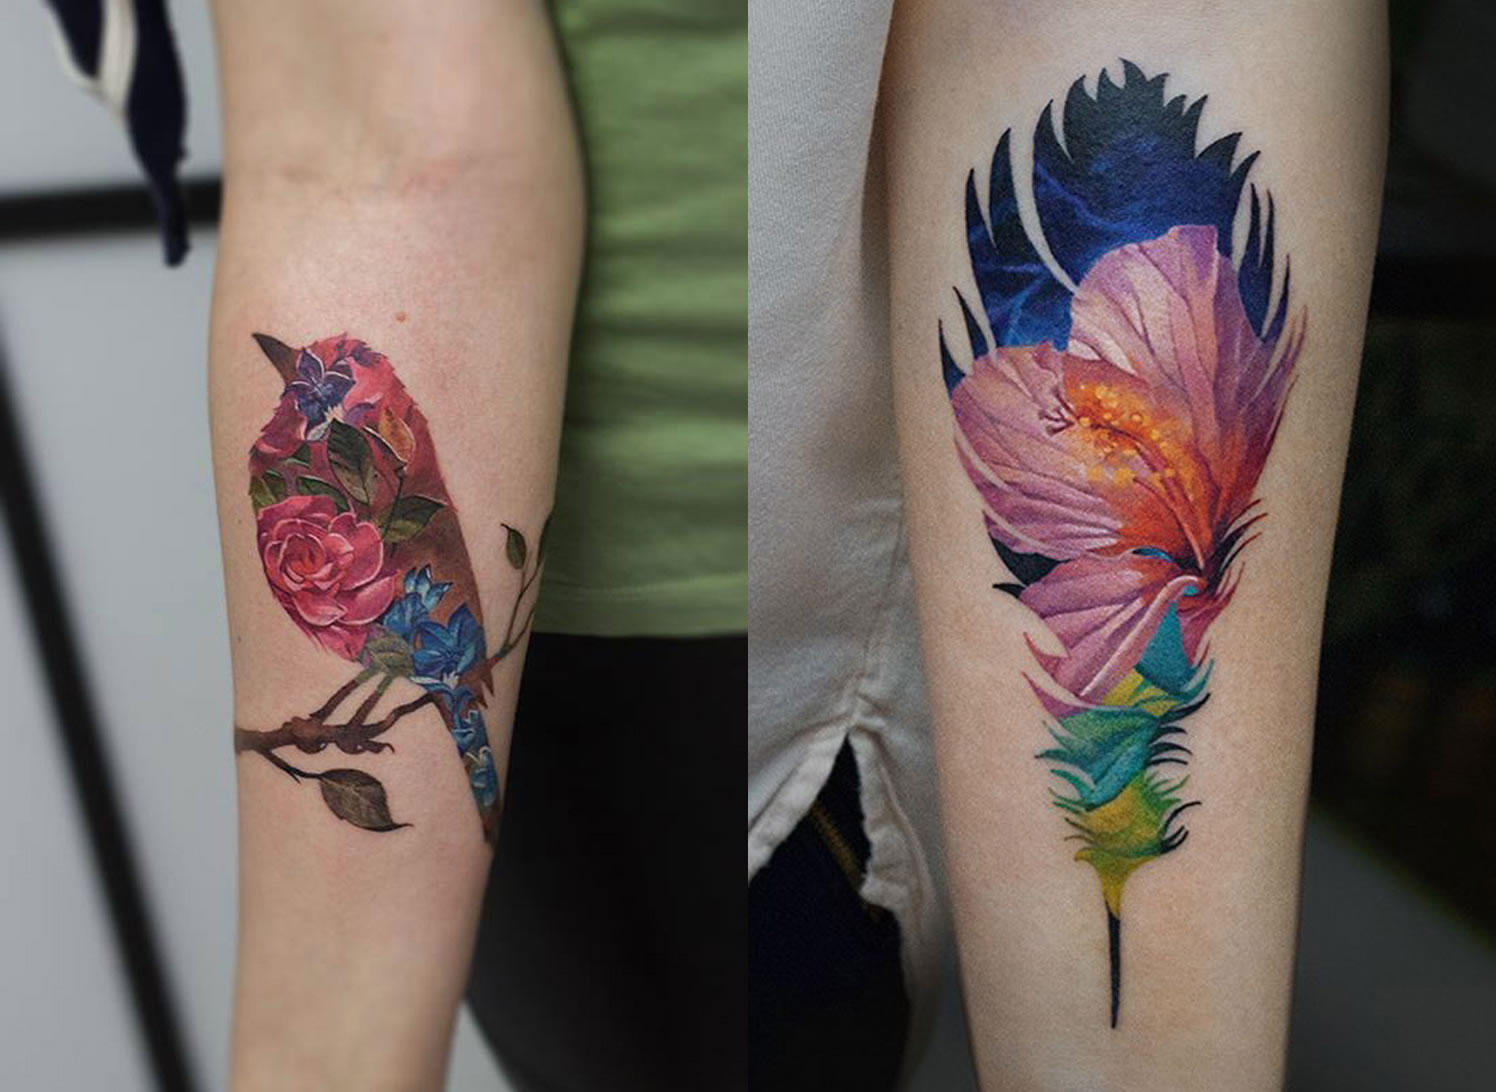 double exposure nature tattoos by andrey lukovnikov